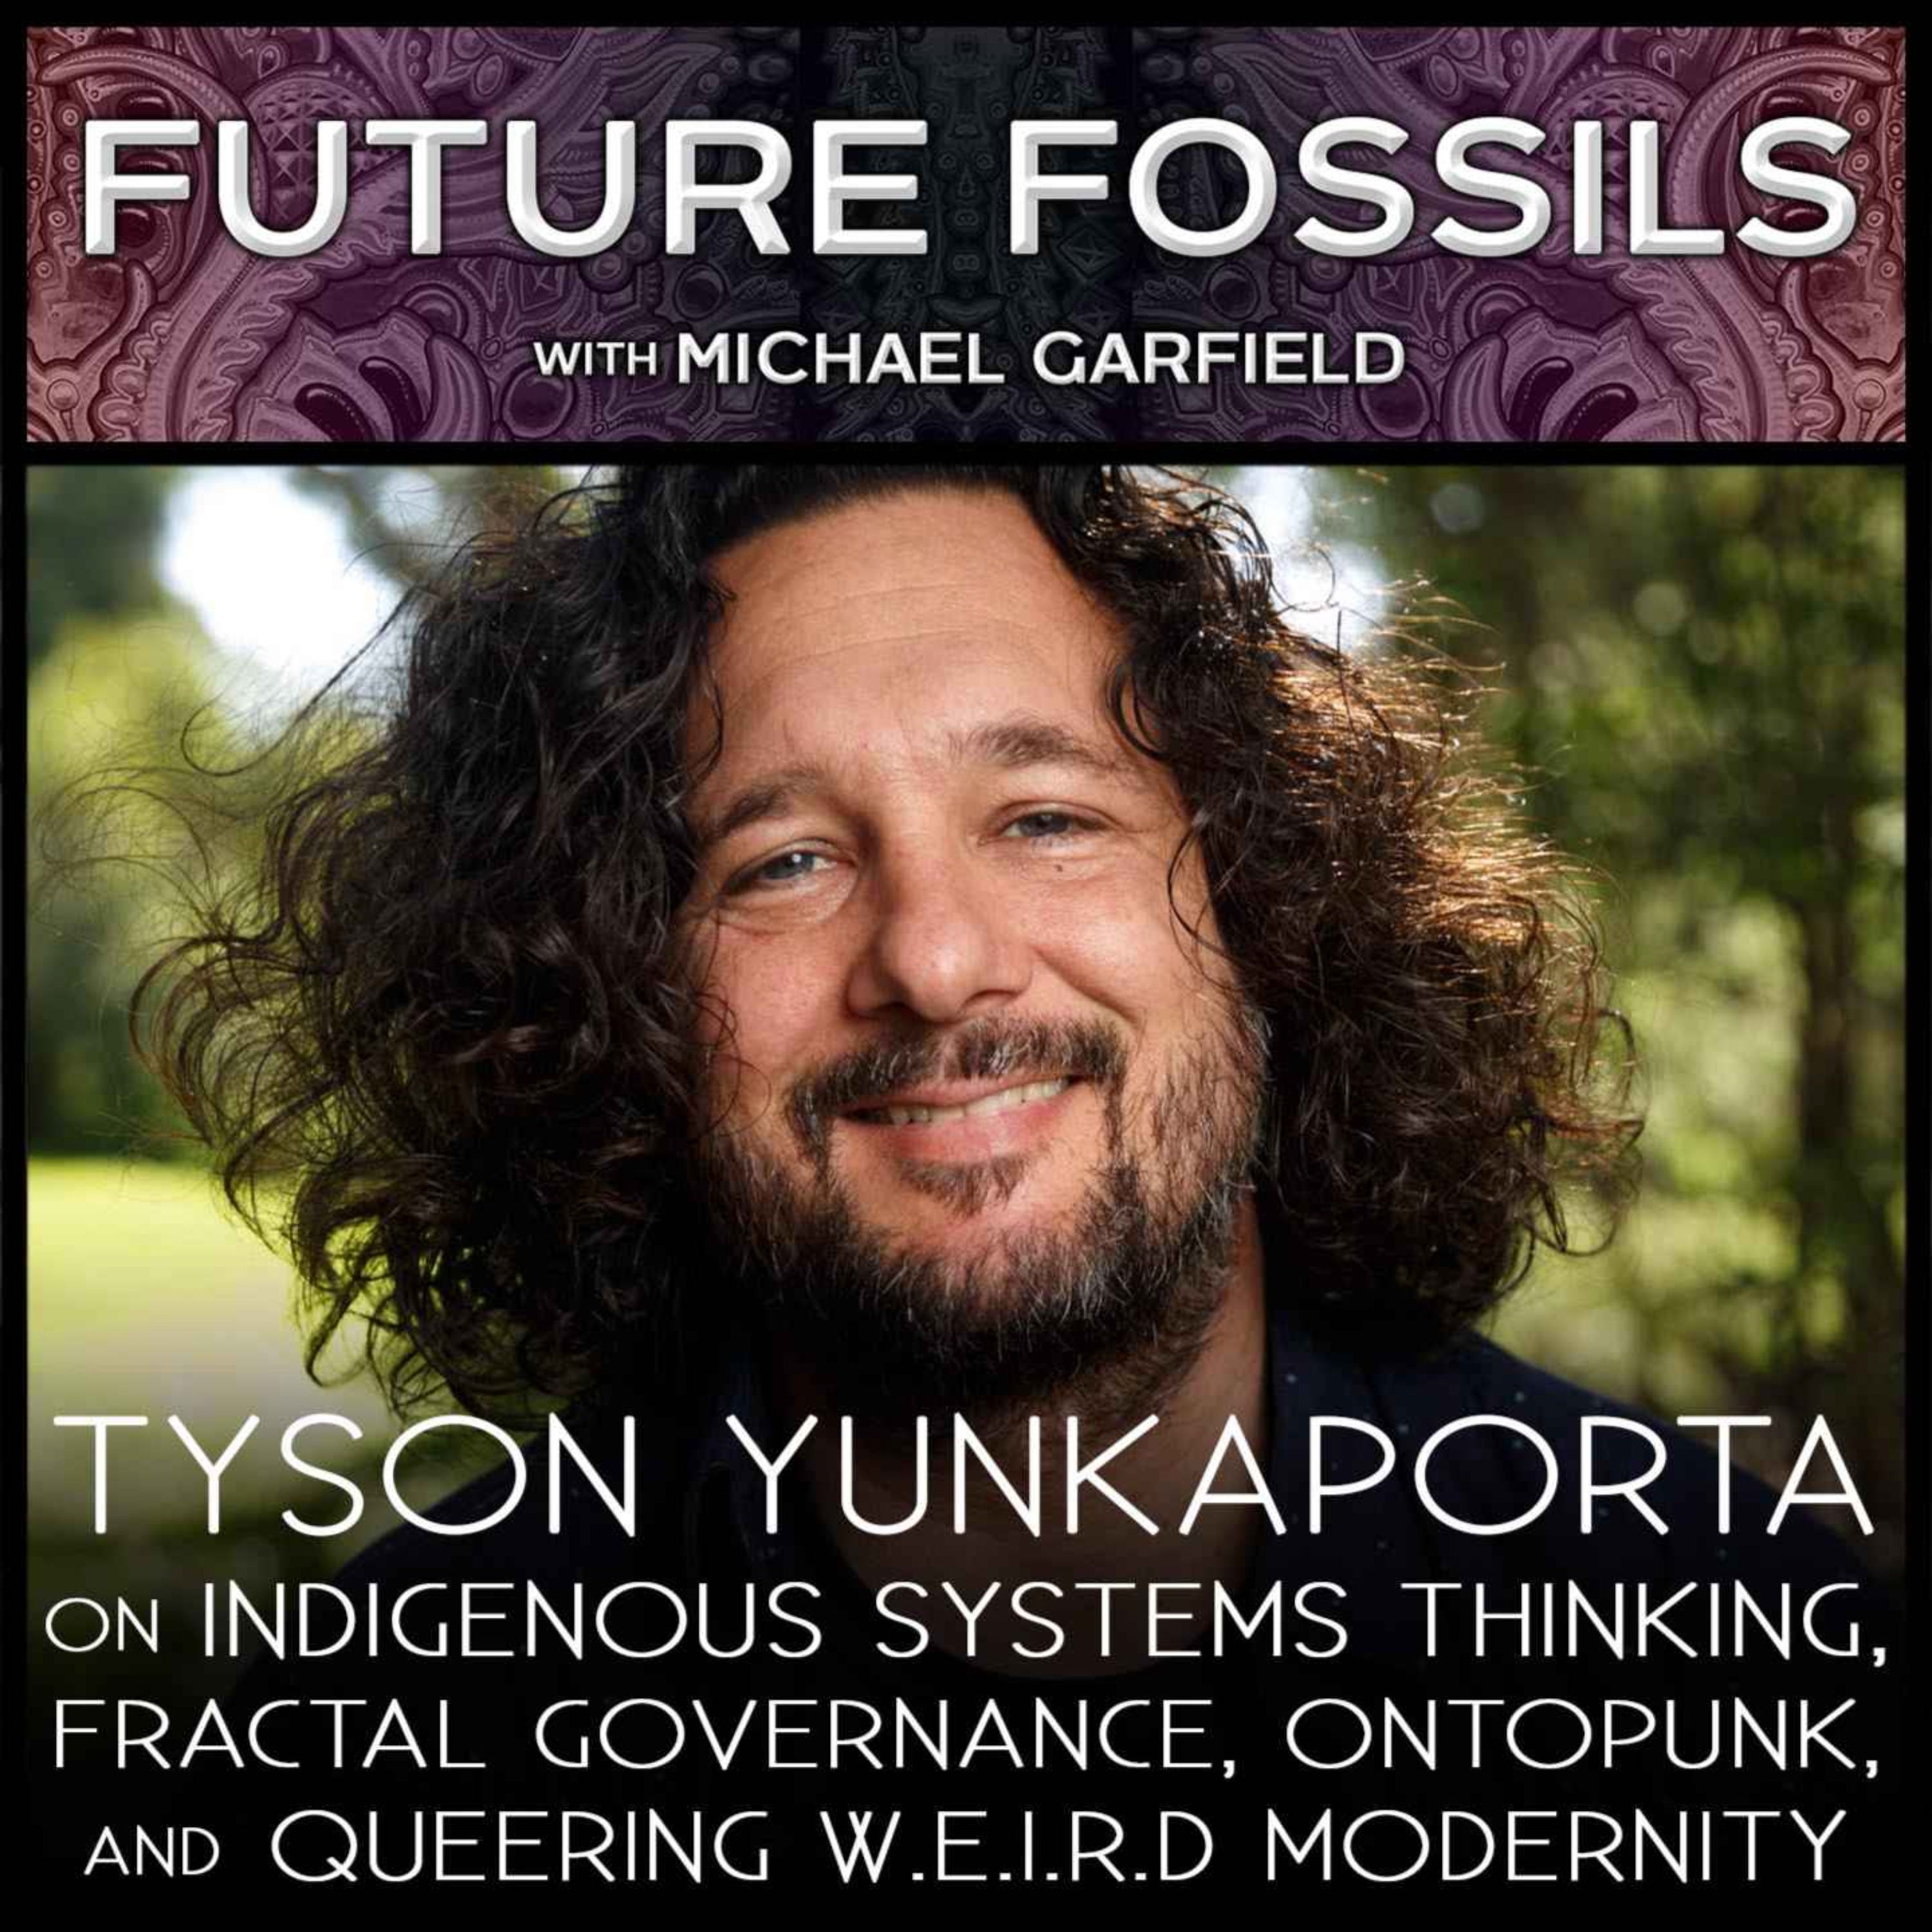 172 - Tyson Yunkaporta on Indigenous Systems Thinking, Fractal Governance, Ontopunk, and Queering W.E.I.R.D. Modernity